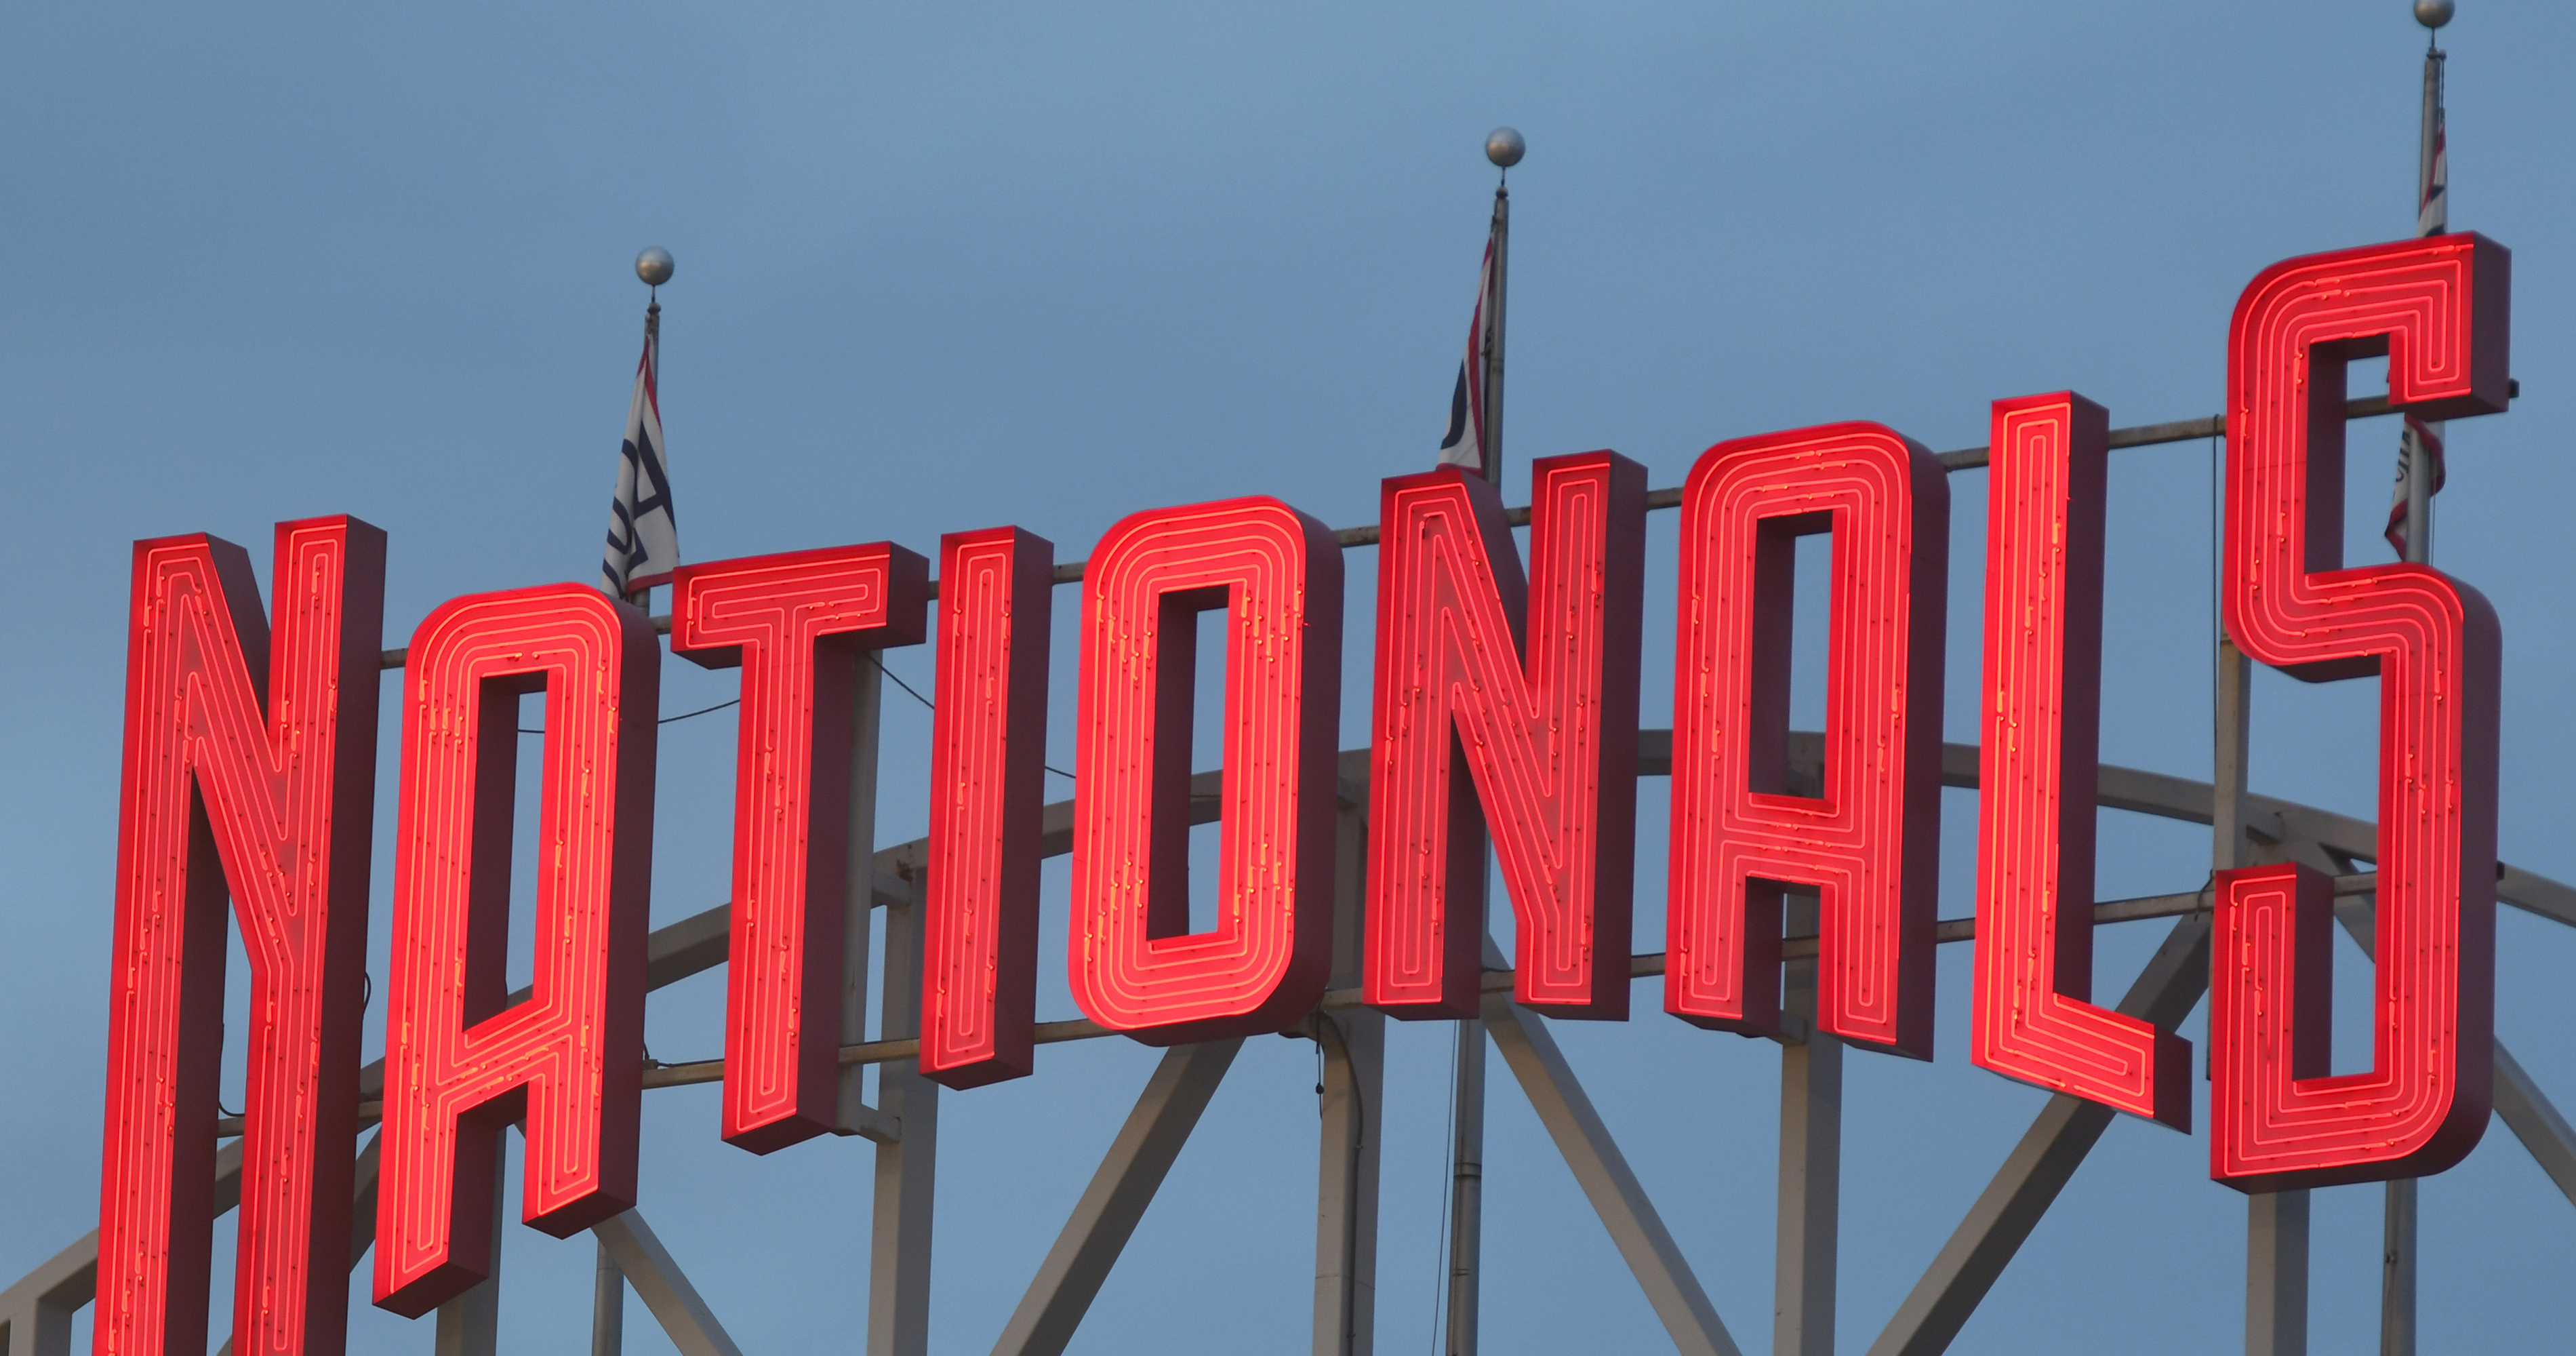 Washington Nationals: An Update on the Potential Sale of the Franchise